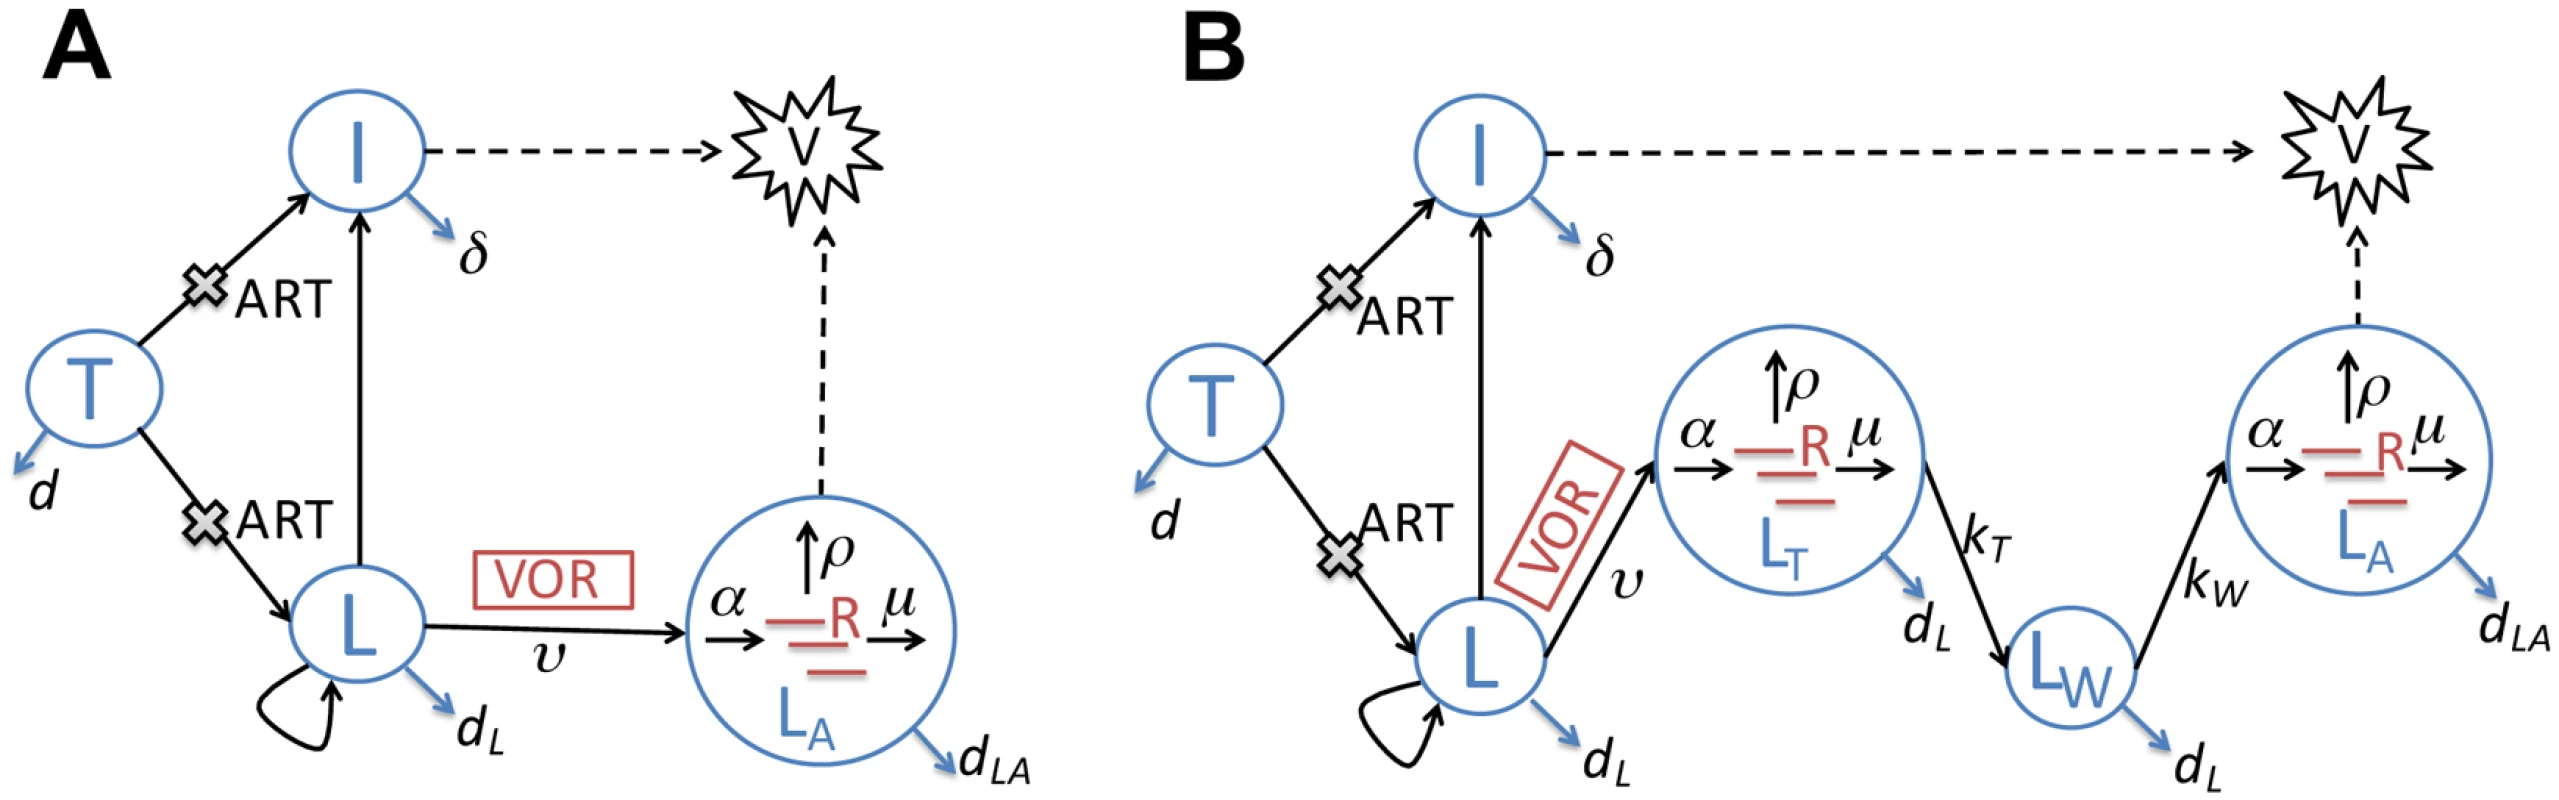 Schematic illustrations of two latency models that describe the impact of vorinostat treatment.